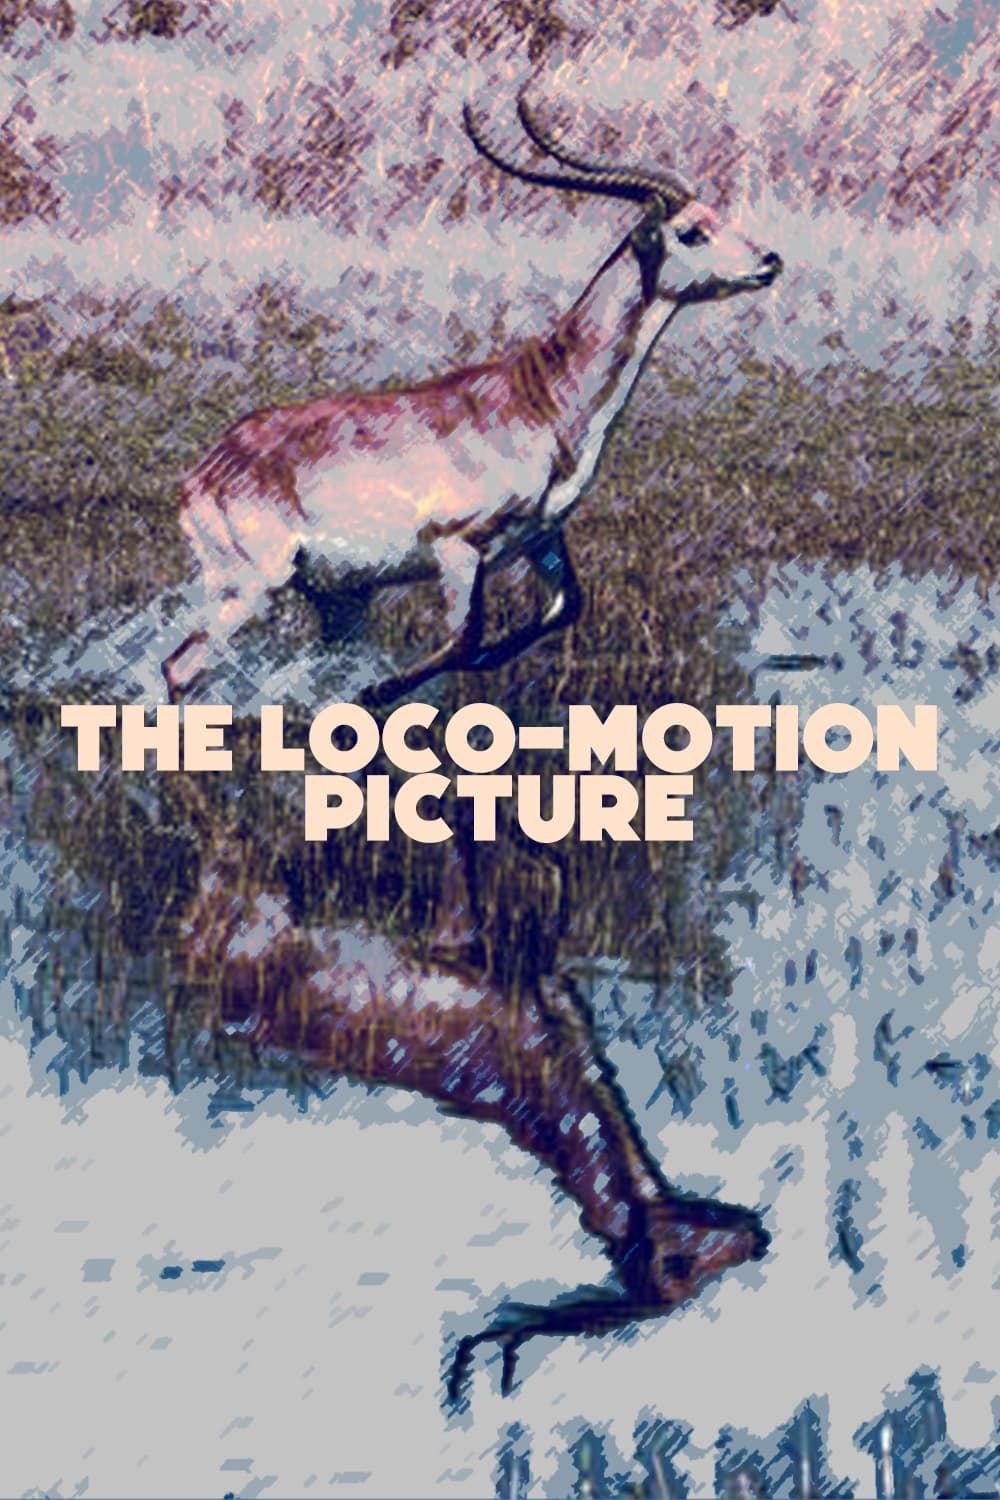 The Loco-Motion Picture